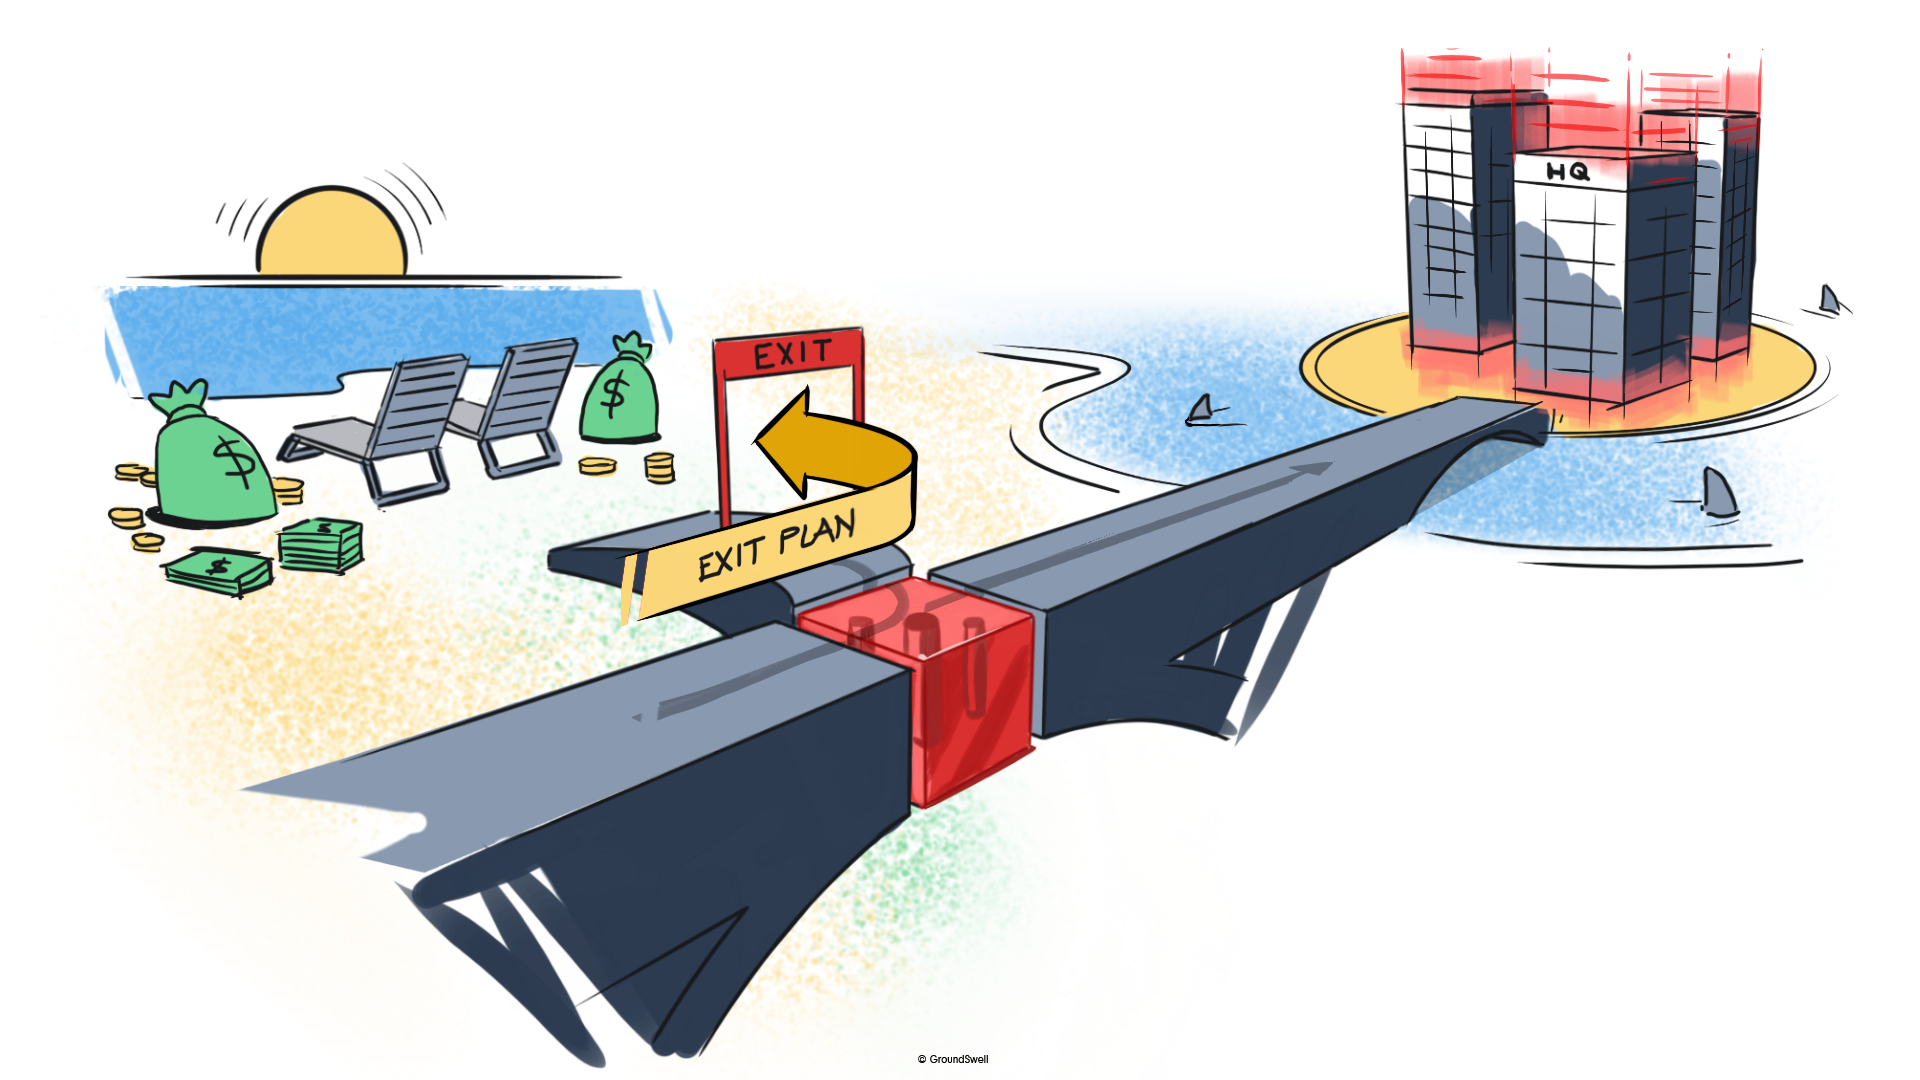 An illustration of a blue bridge that is crossing a moat of water to a company headquarters. The bridge has an off ramp, or exit, to retirement on the left hand side which leads to a beach with lawn chairs and bags of money. This image depicts an exit plan for business owners where they can enjoy retirement while their business continues to thrive in the future, under new ownership.